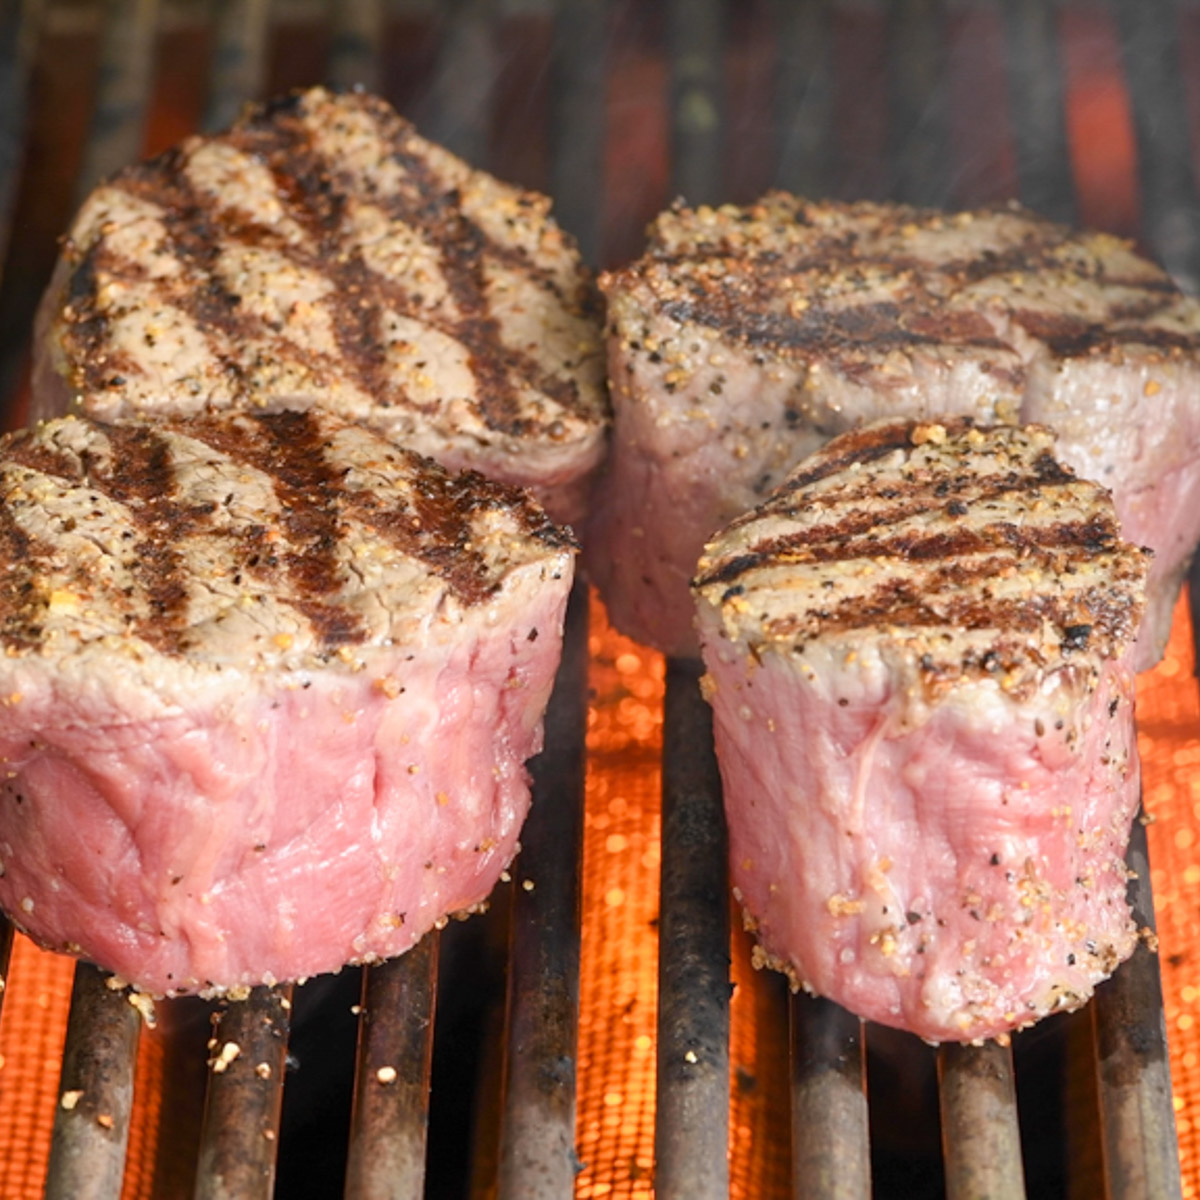 File mignon steaks on the grill.